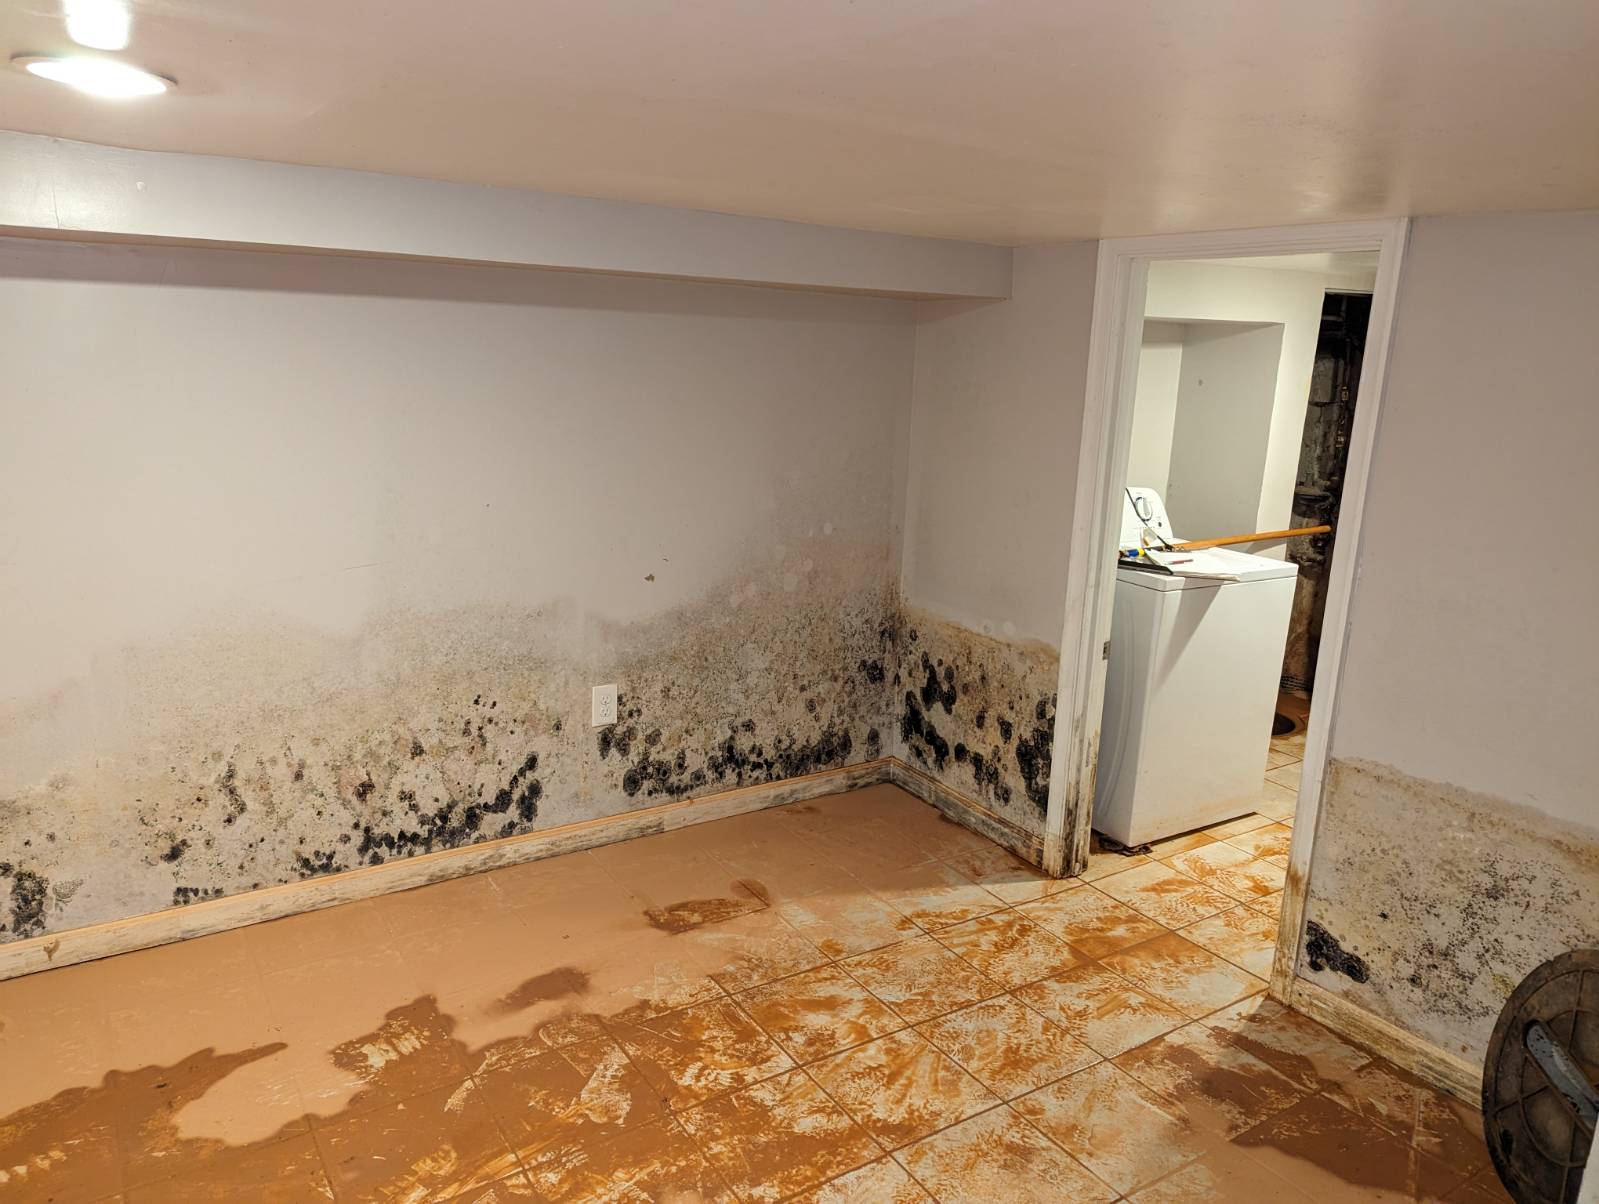 damaged floors and black mold wall